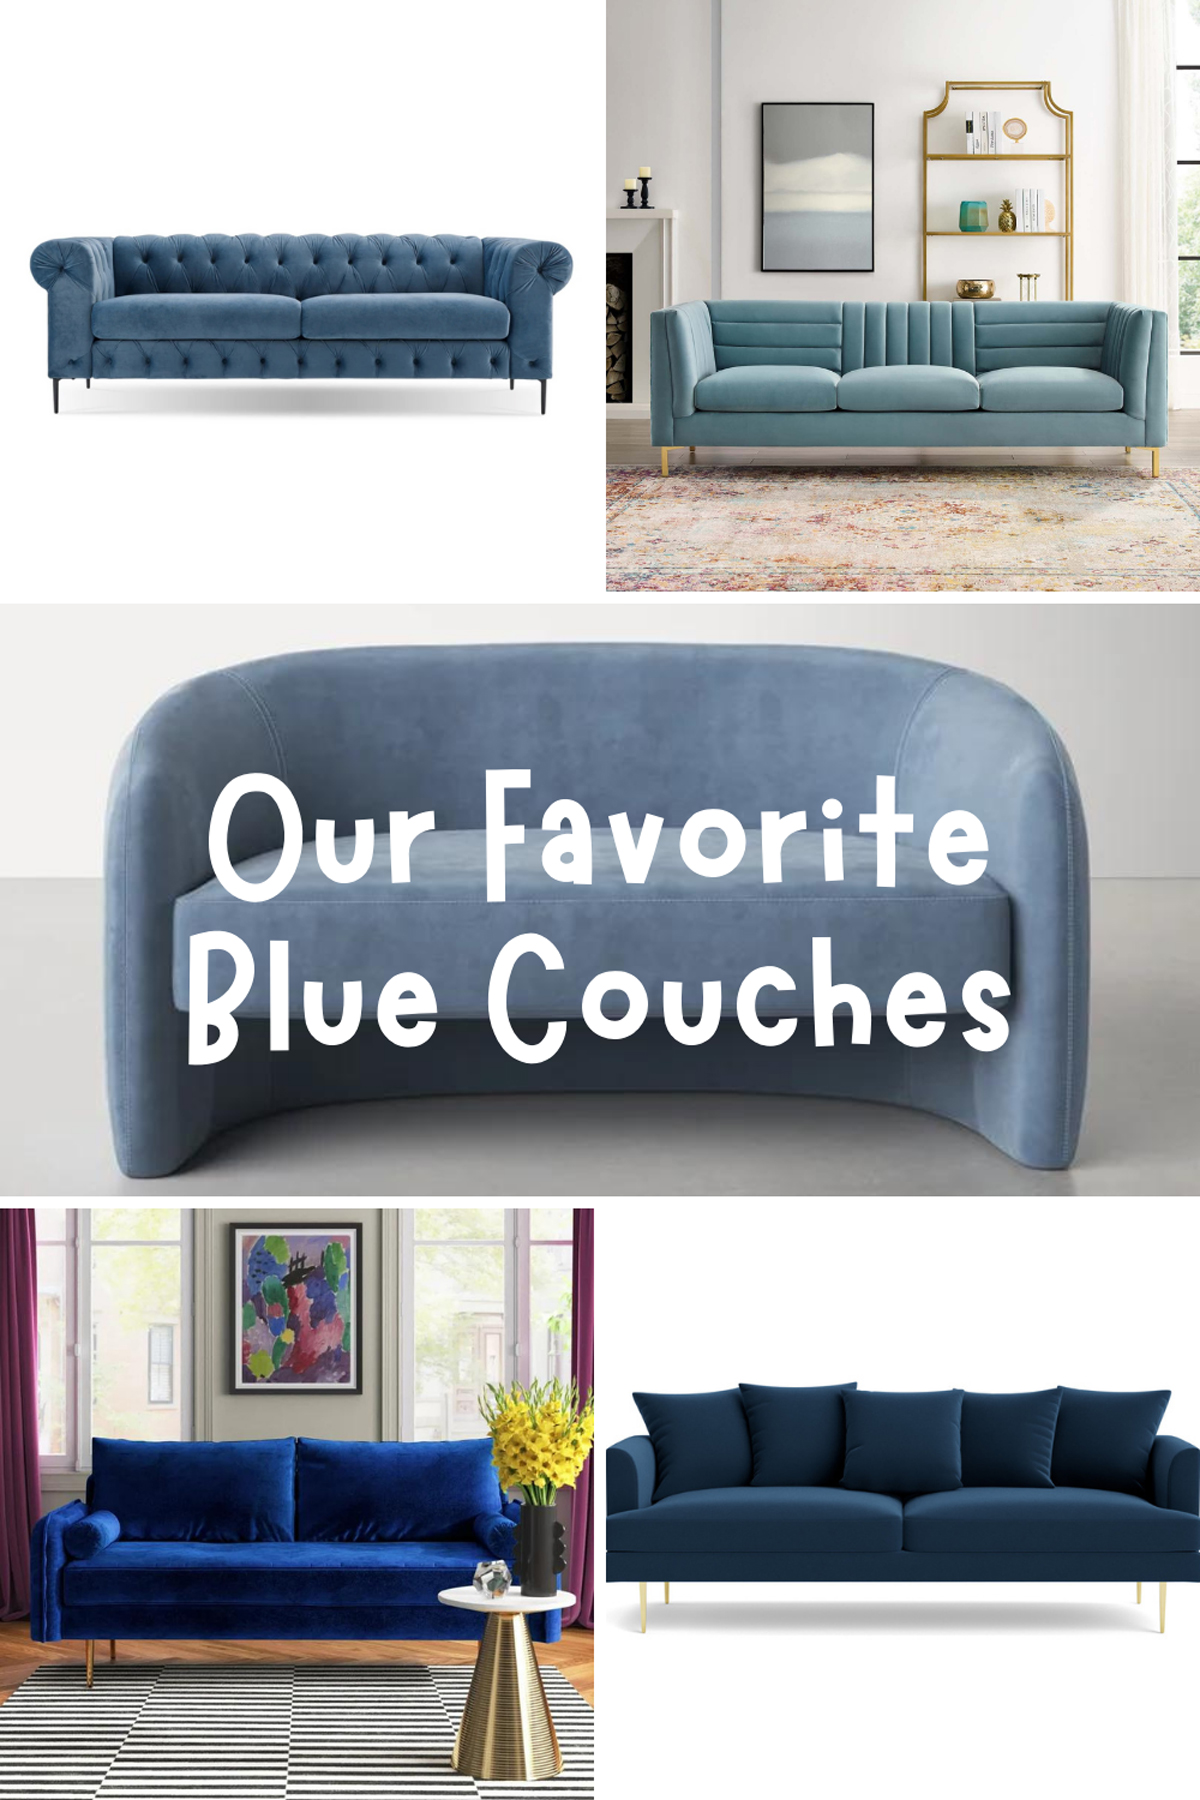 Blue Couches to Buy